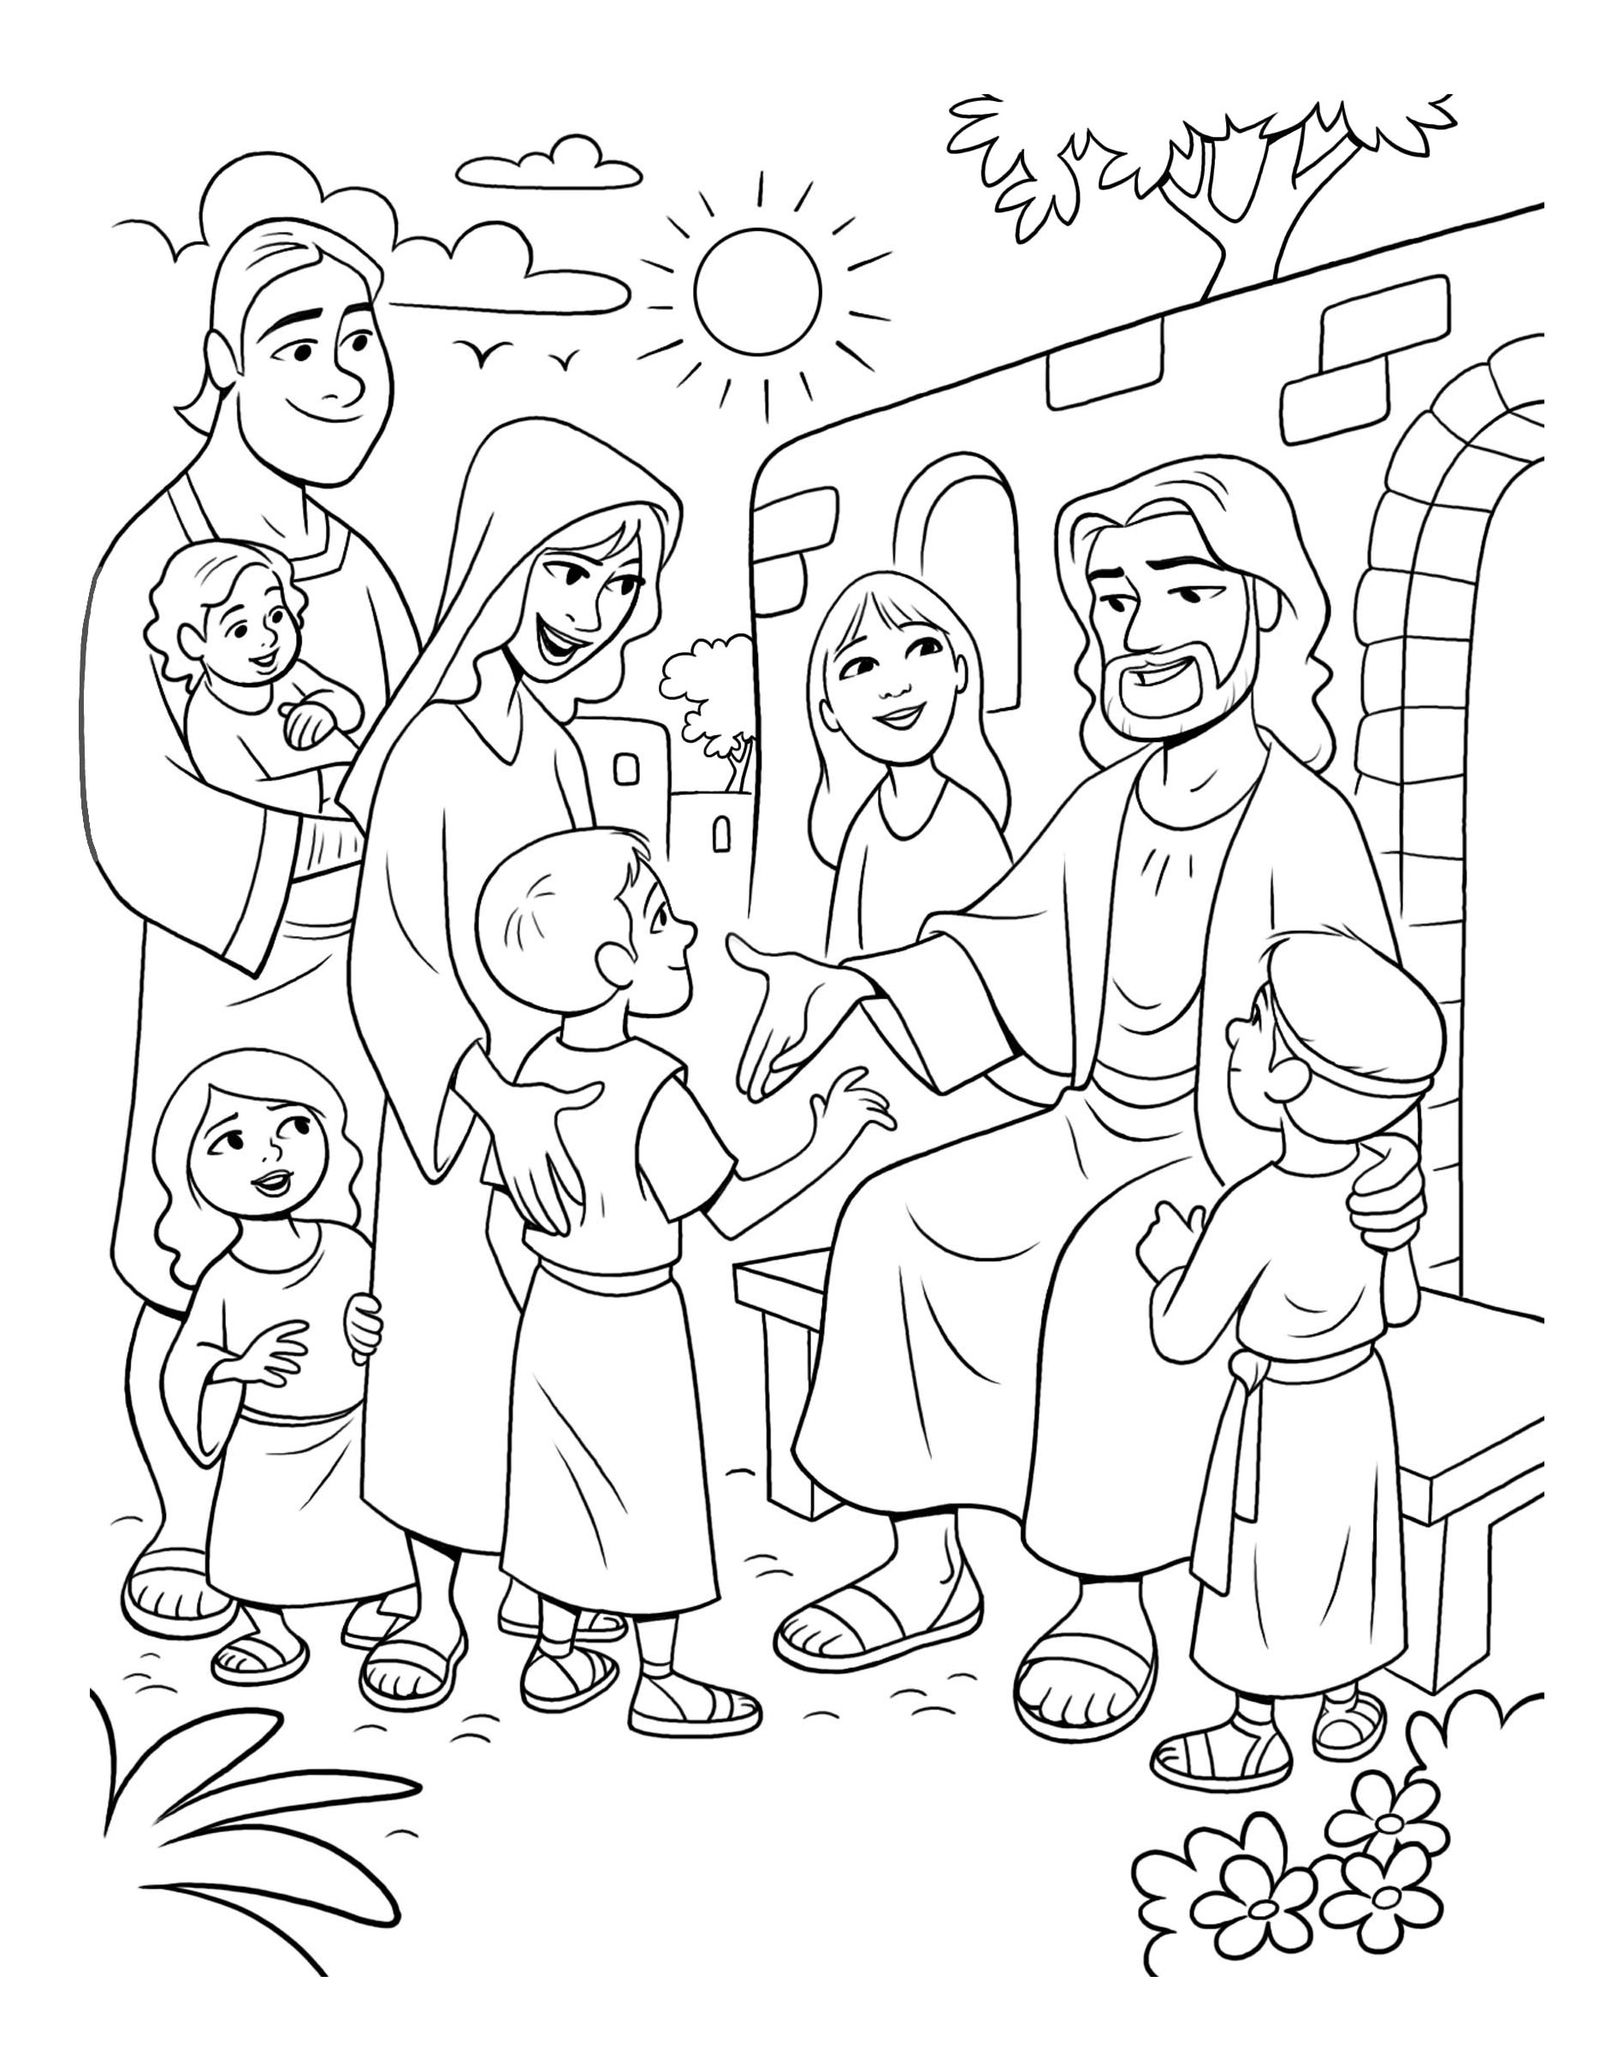 Christ sits and meets with children.